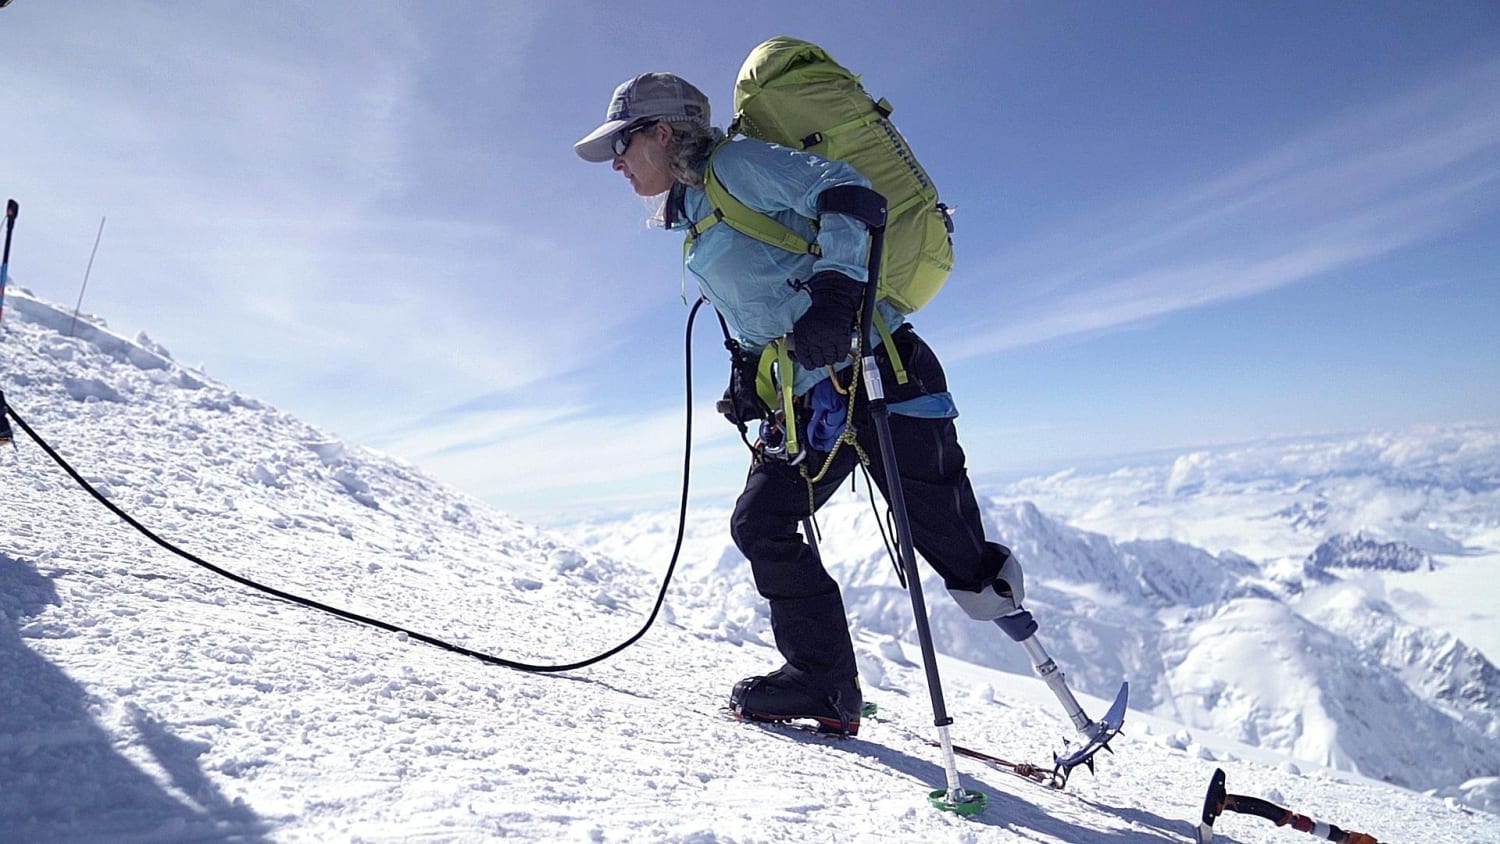 Kirstie Ennis Is Climbing the Highest Mountains in the World—While Wearing  a Prosthetic Leg